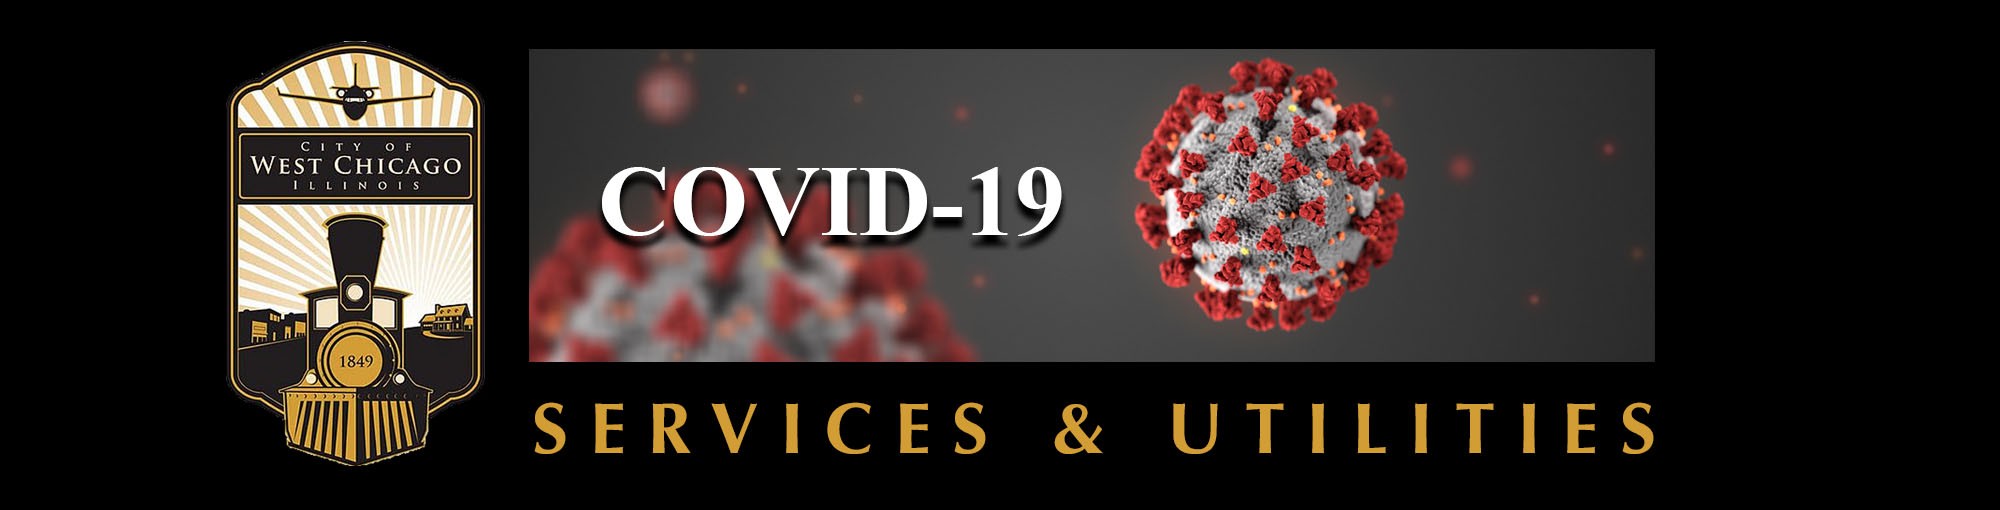 Graphic of West Chicago logo and COVID-19 virus molecule